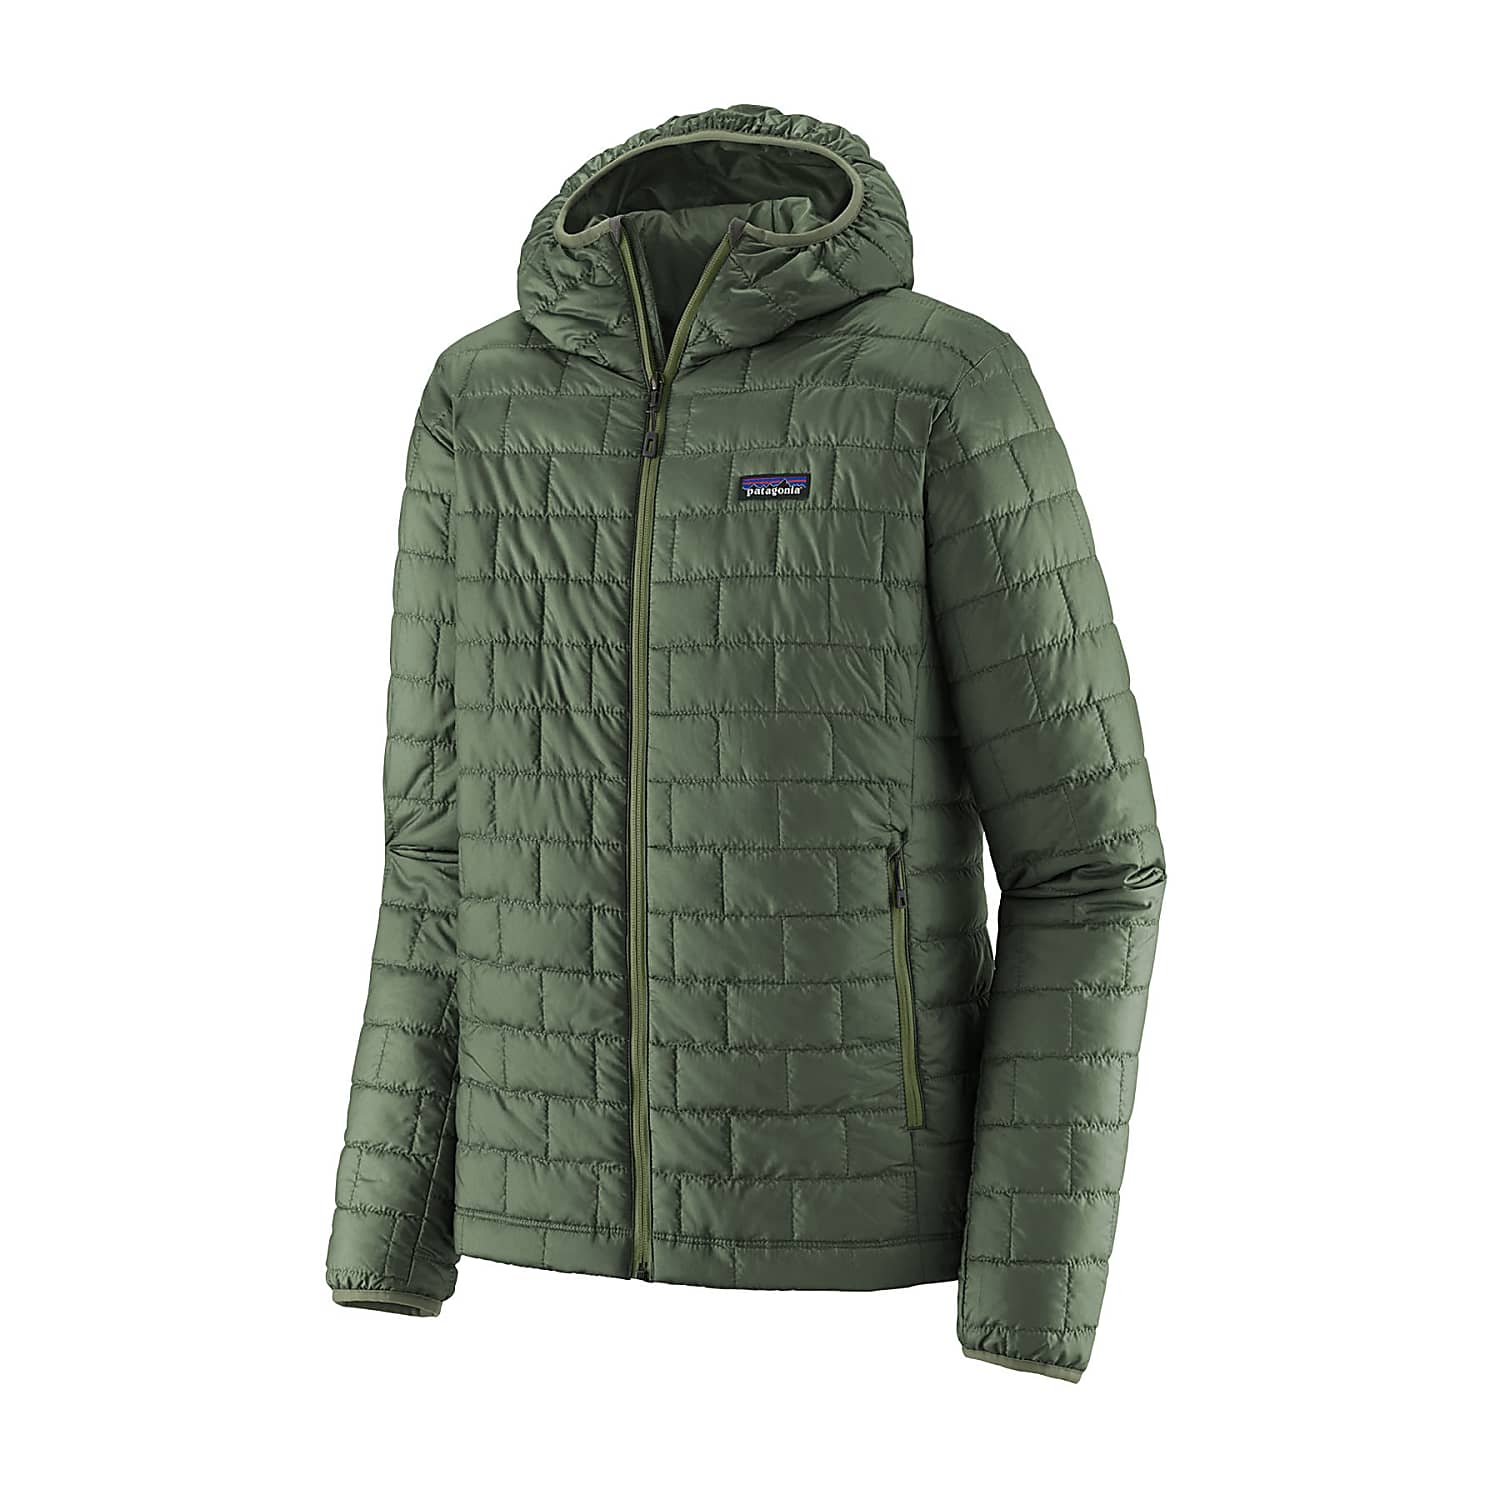 Patagonia Nano Puff Jacket - Synthetic Jacket Men's, Free UK Delivery